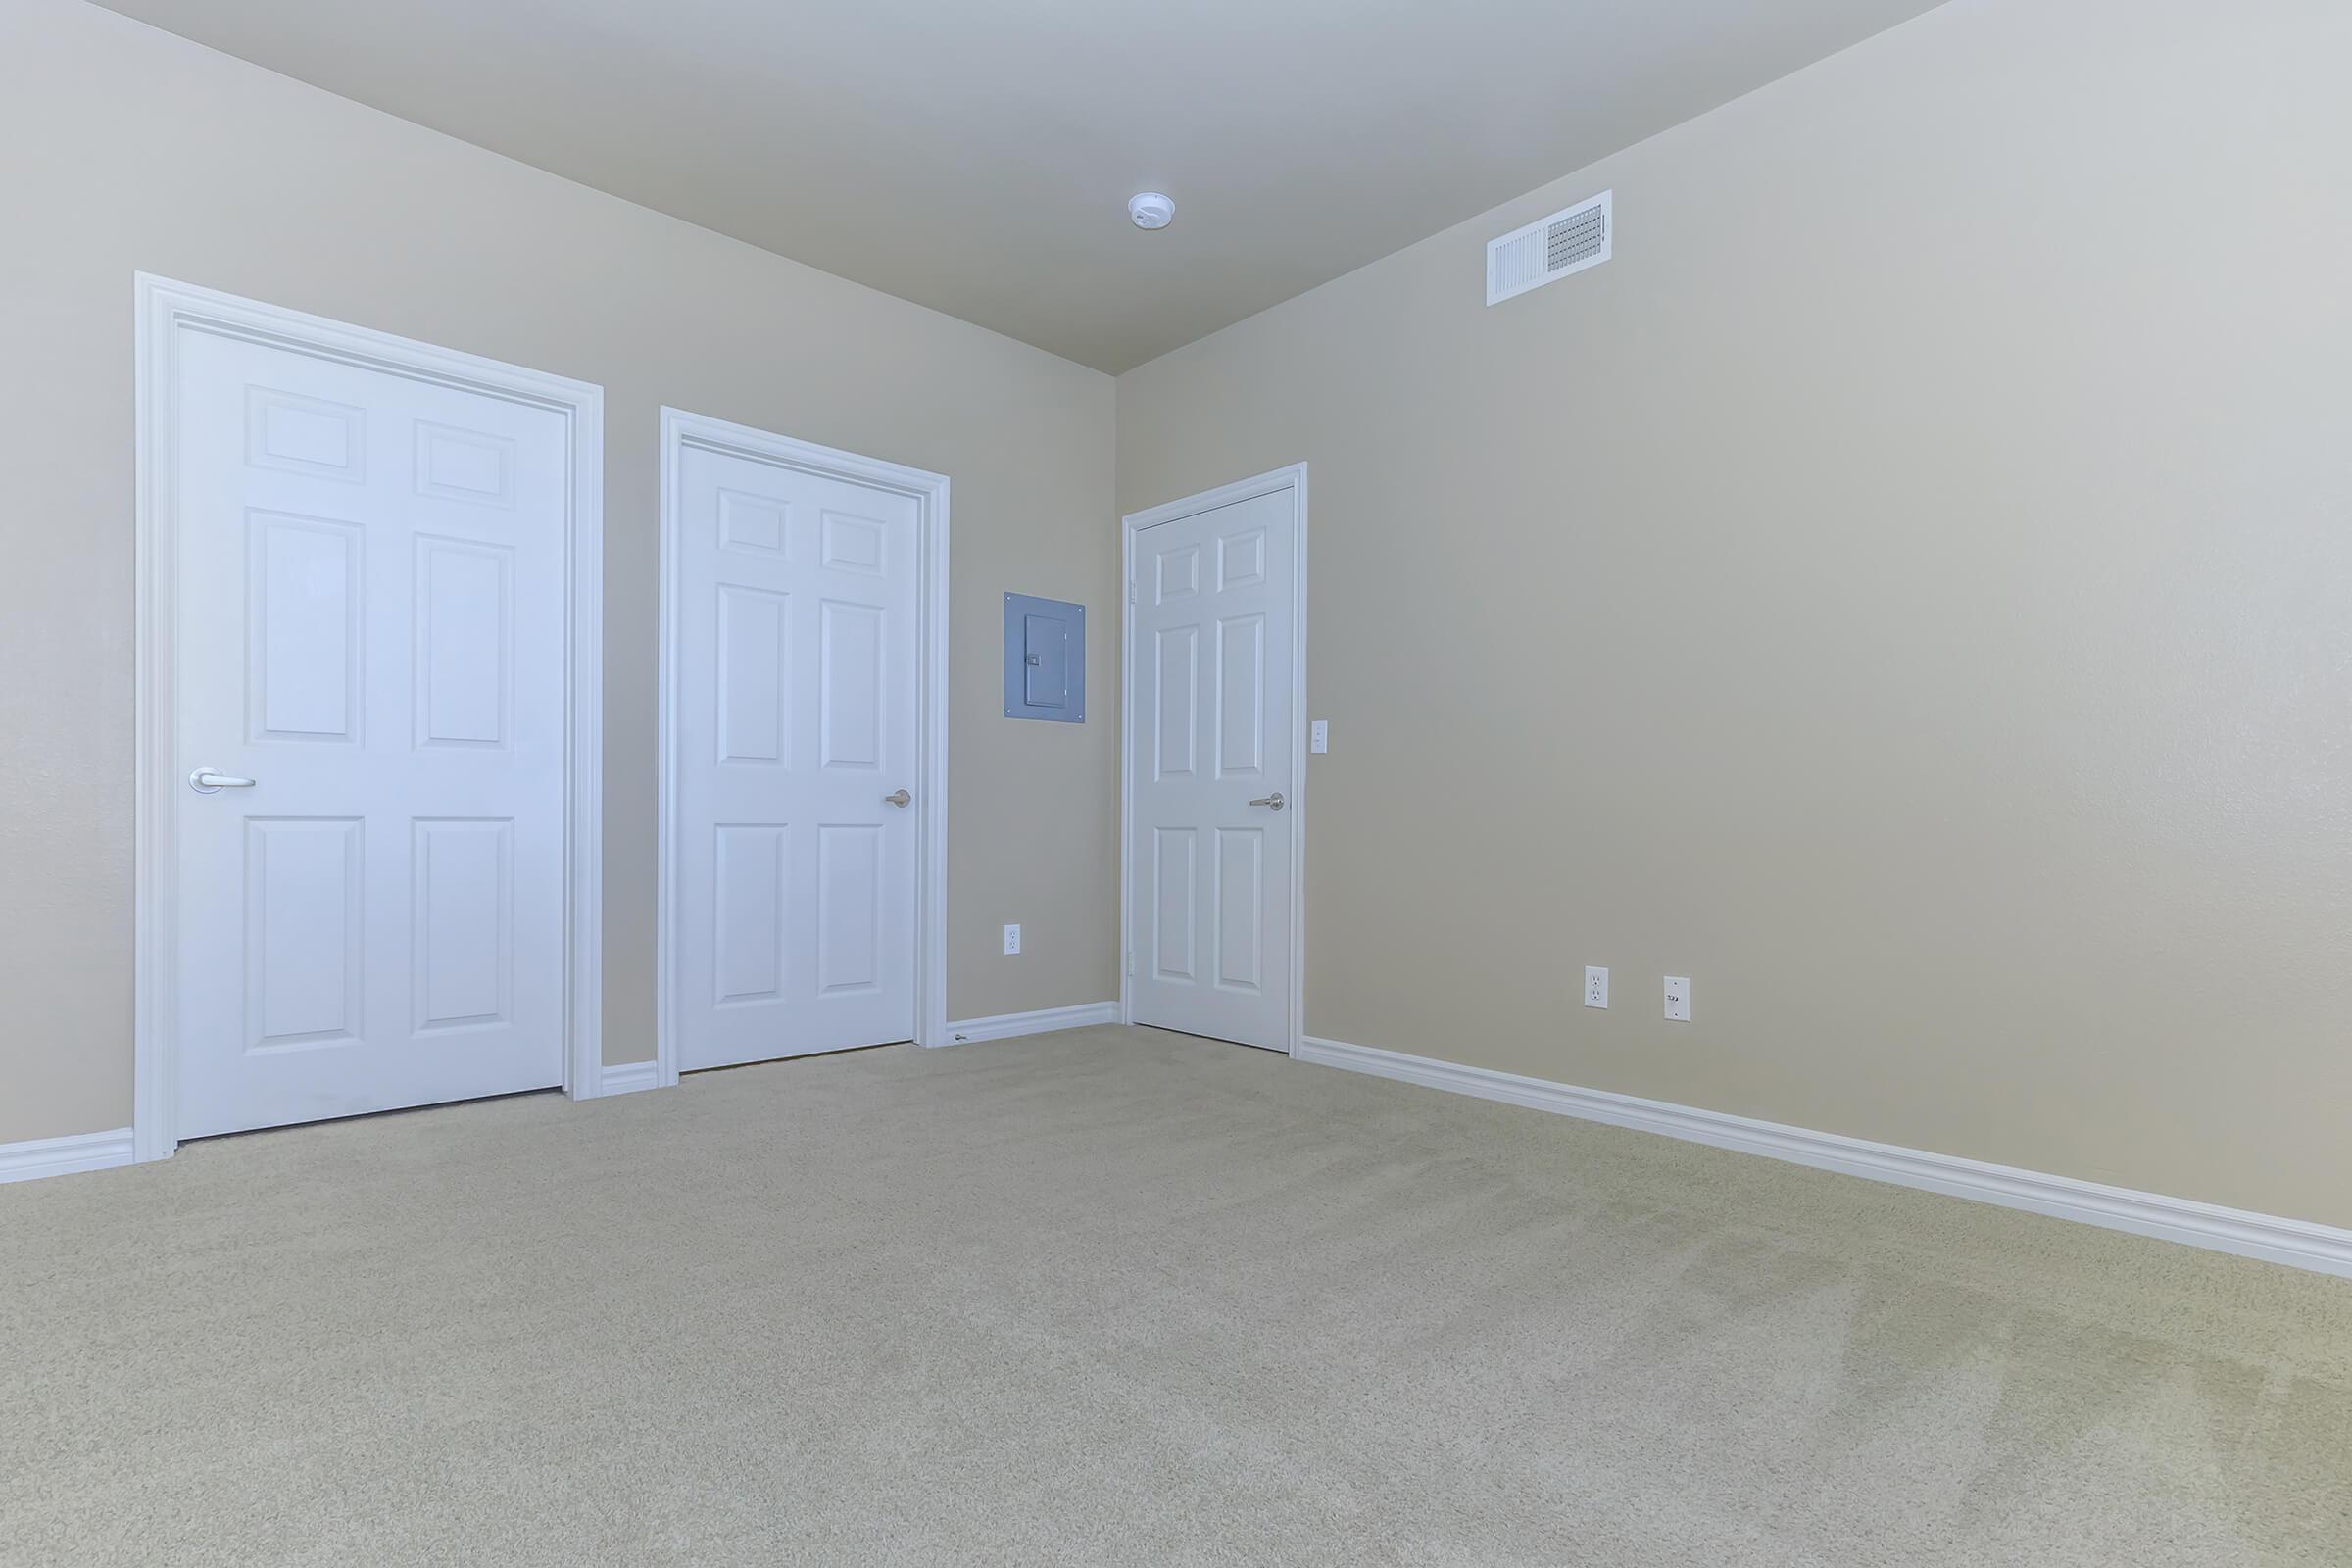 Vacant bedroom with carpet